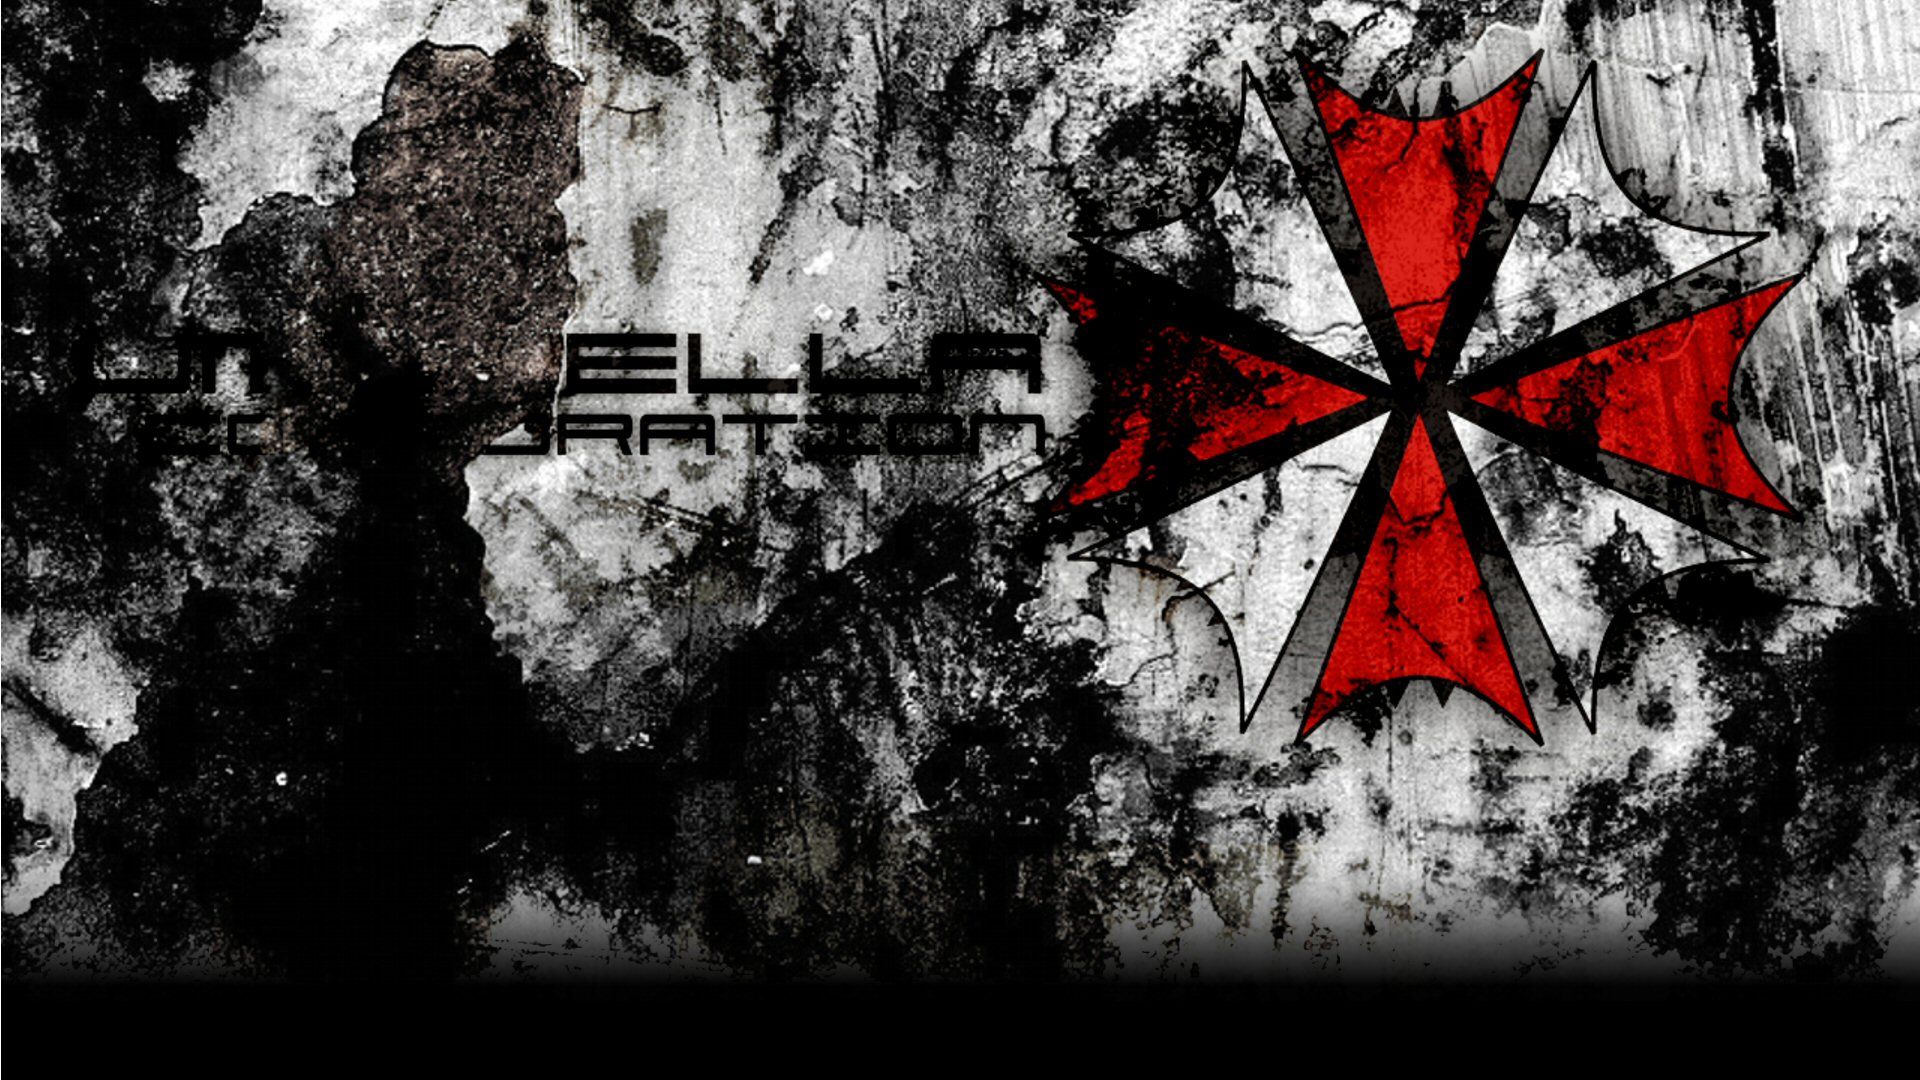 resident evil wallpapers Wallpapers